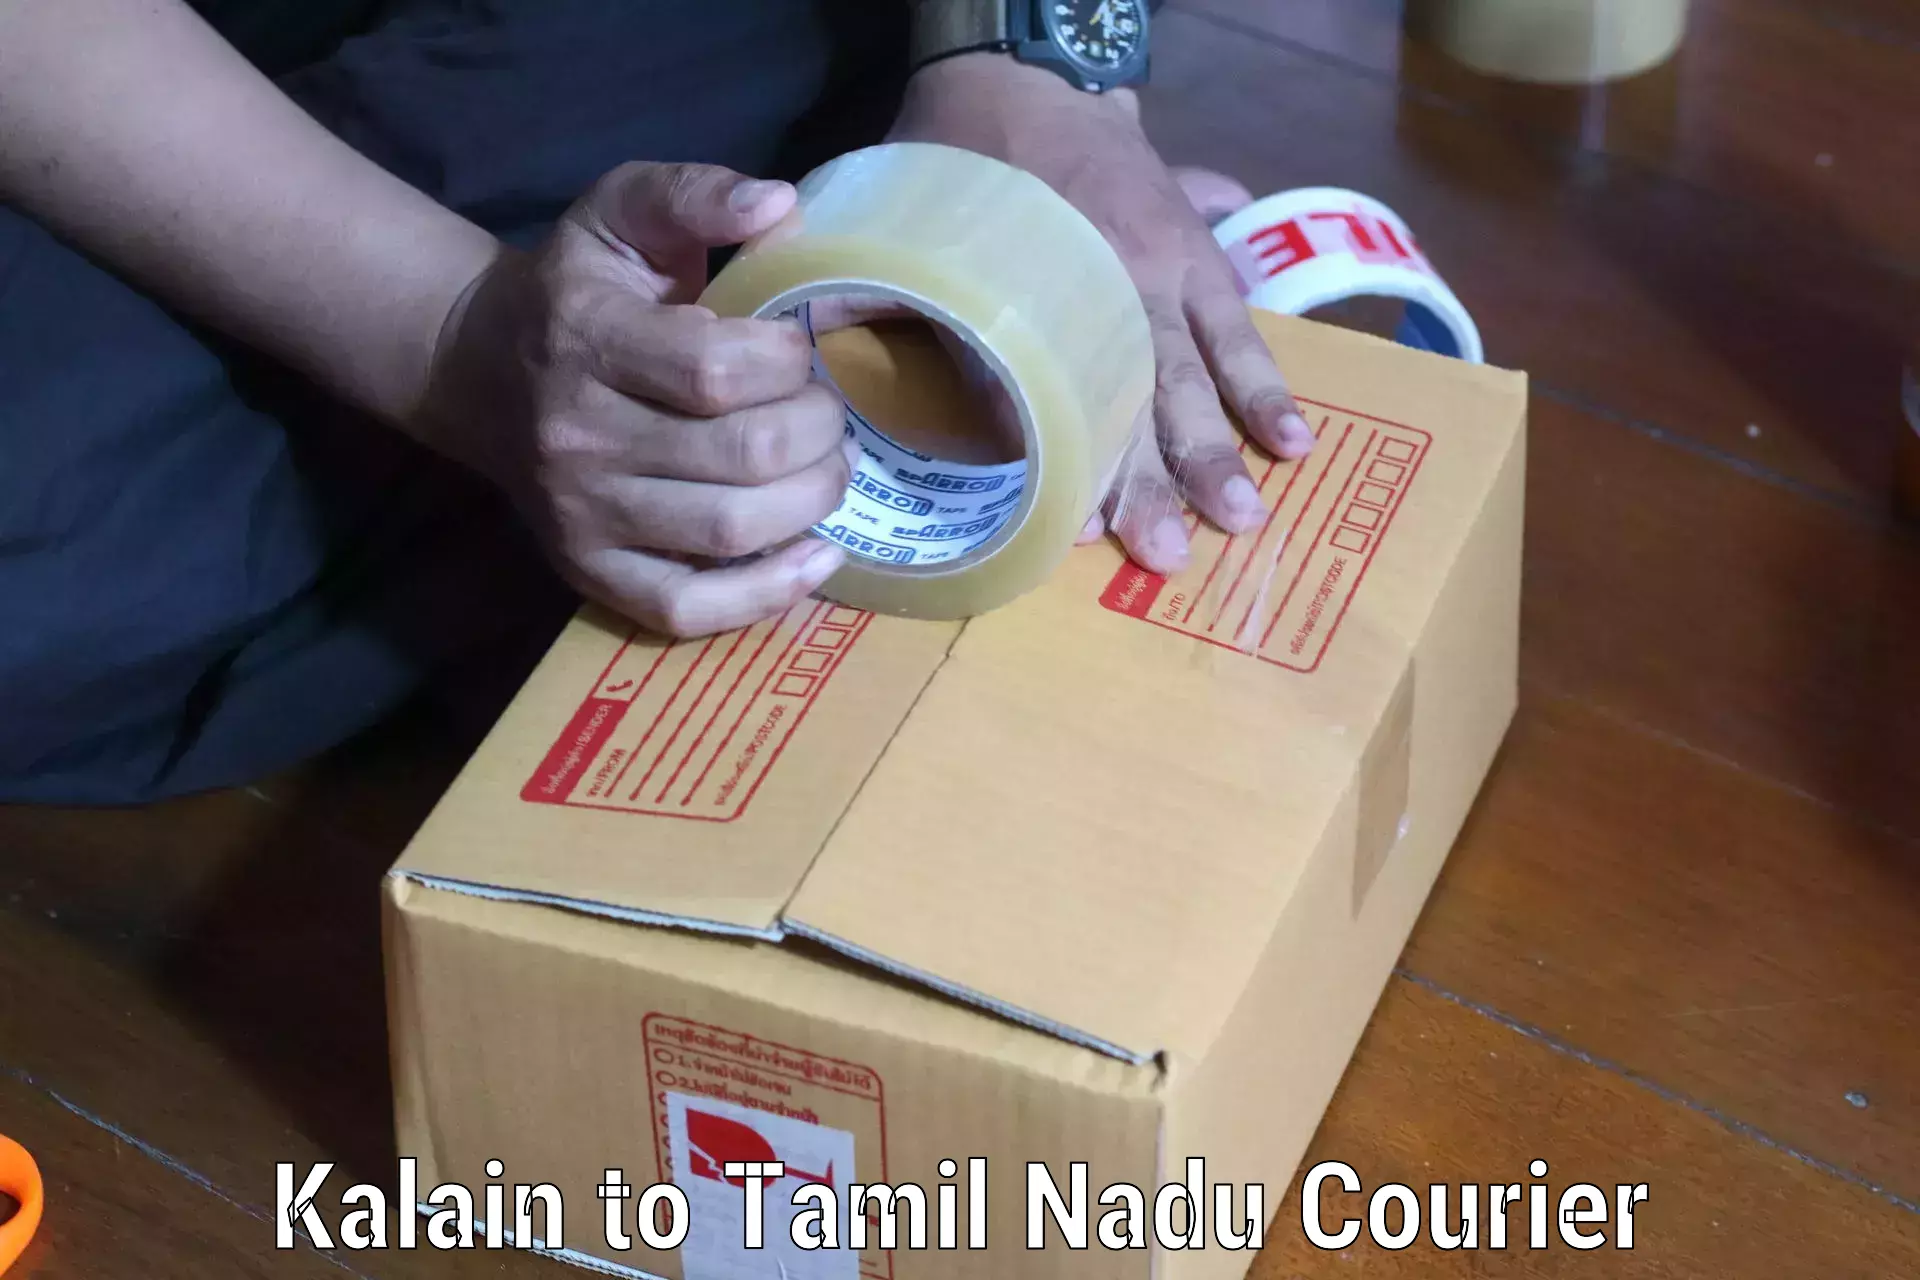 Trackable shipping service Kalain to Chengam